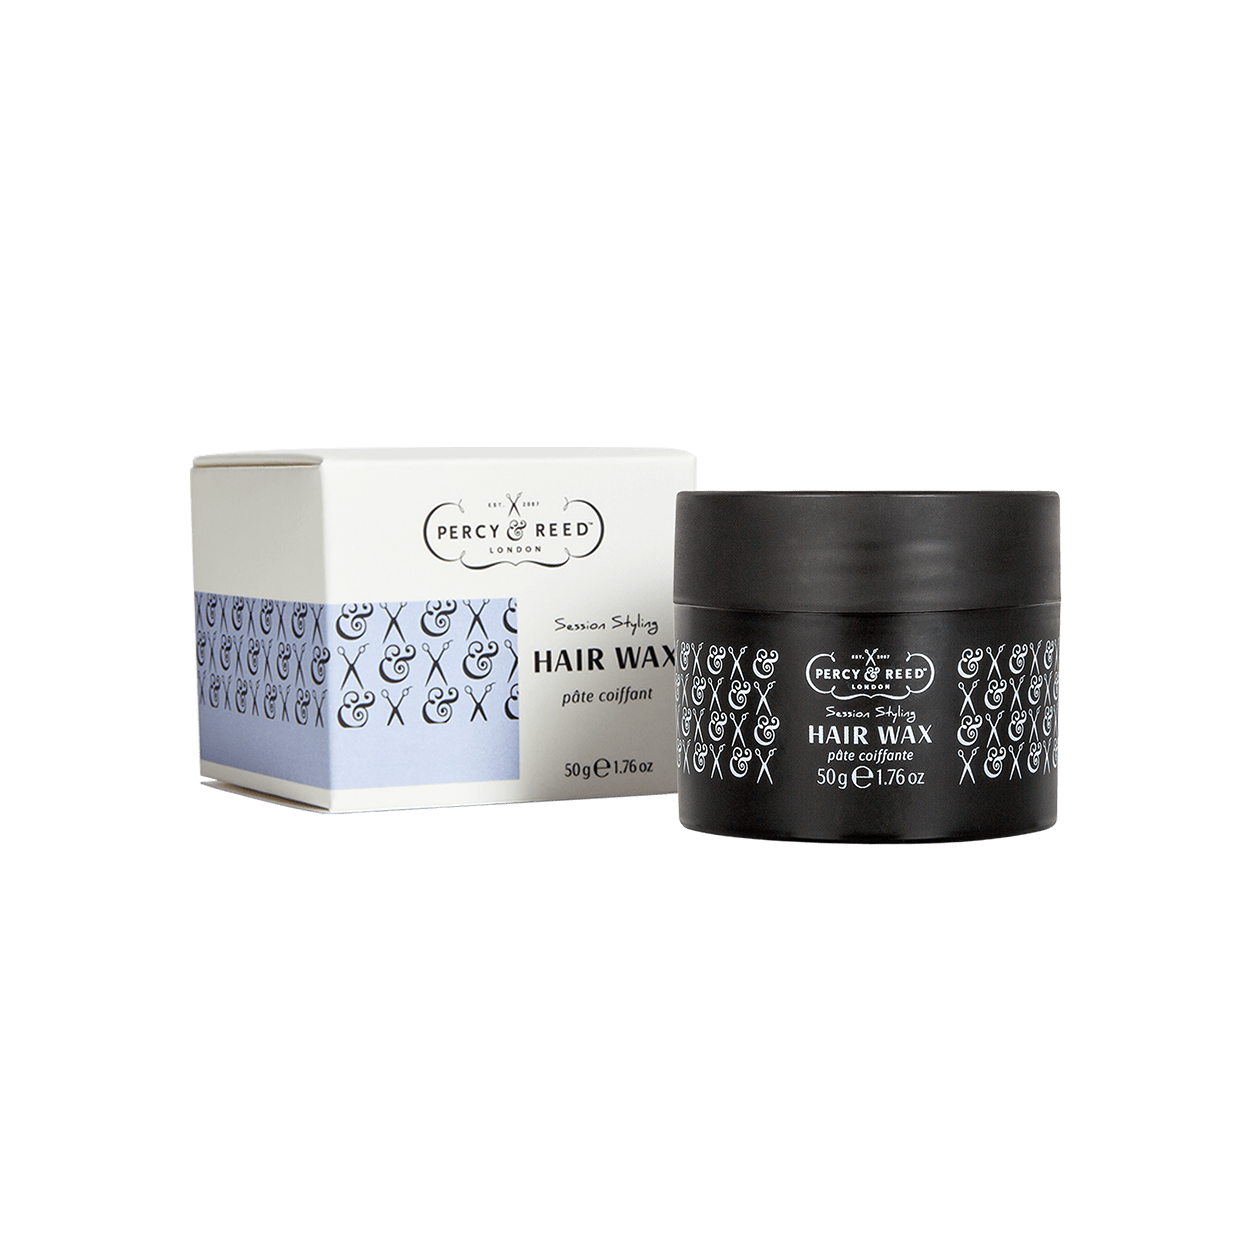 Percy & Reed Session Styling Hair Wax